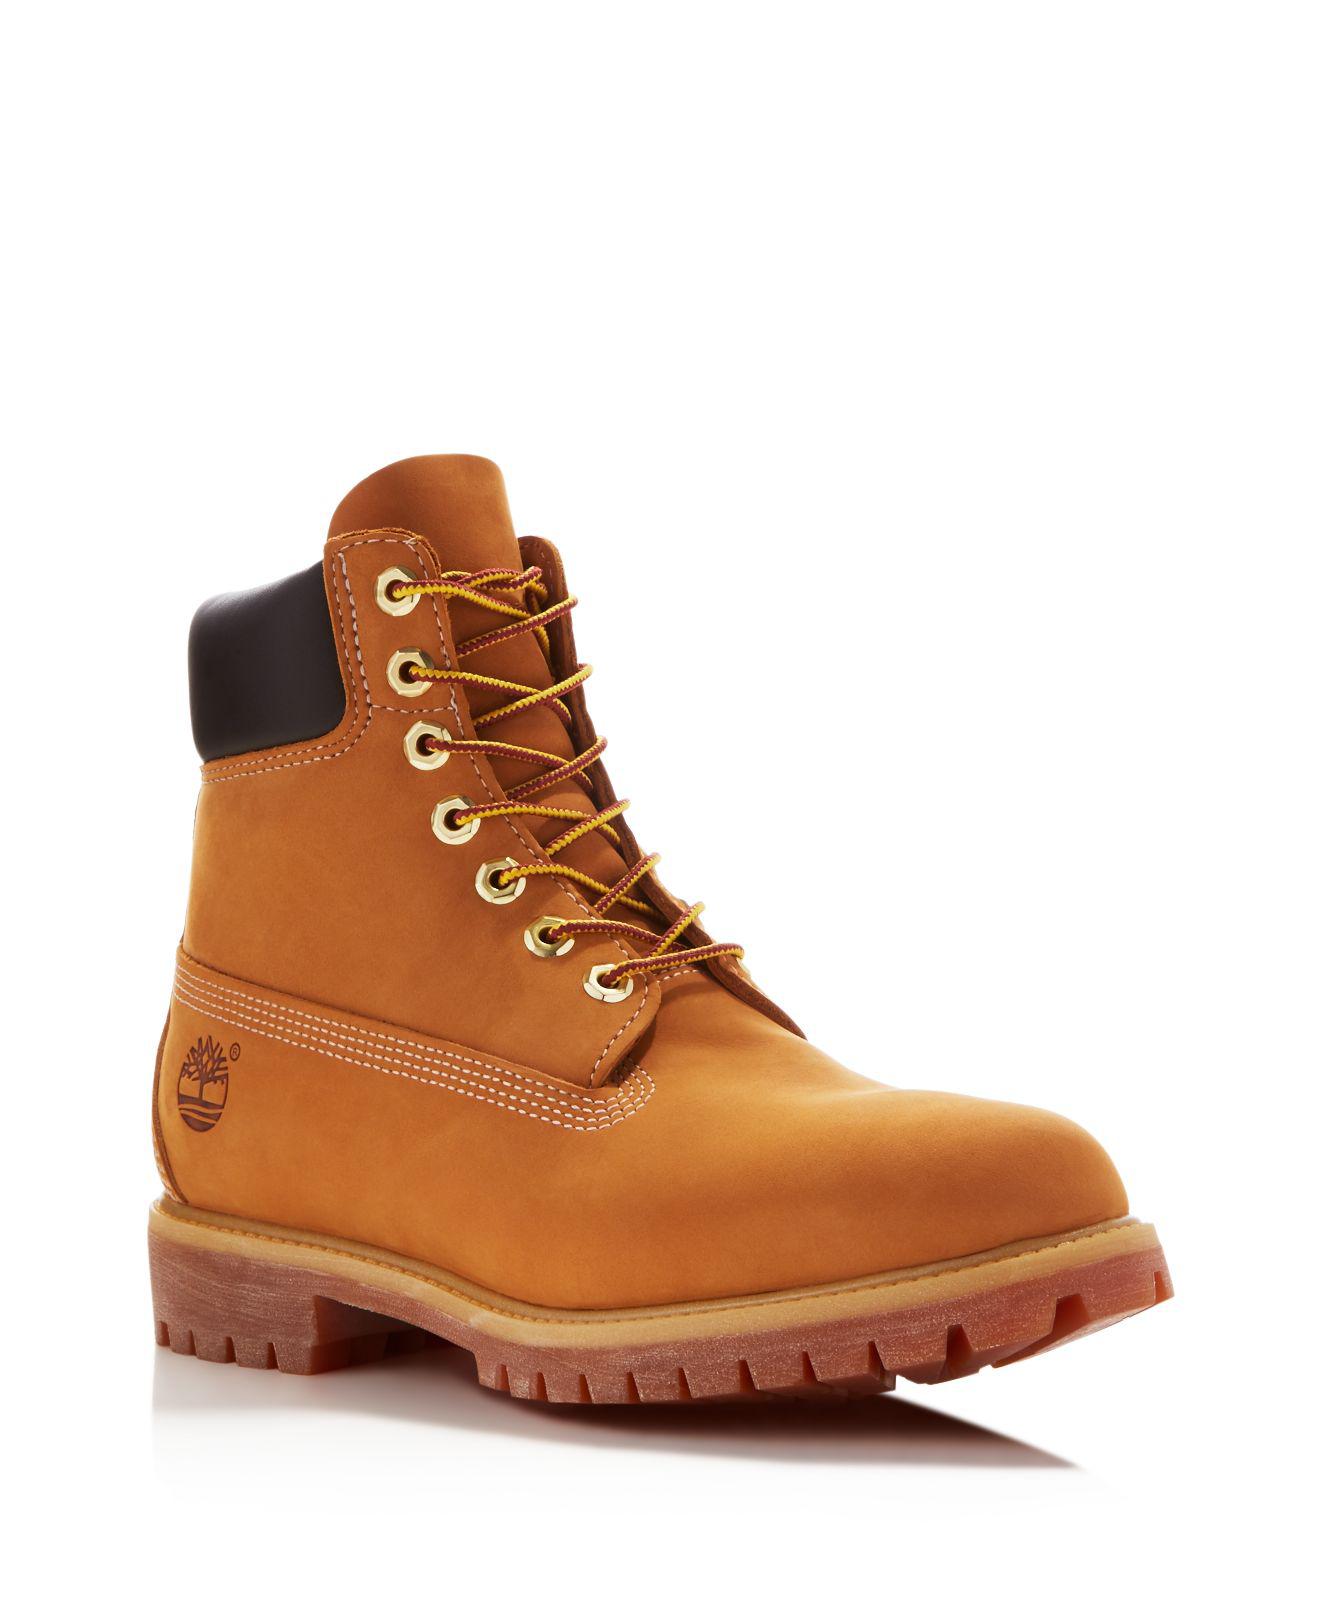 Lyst - Timberland Icon Waterproof Boots in Natural for Men